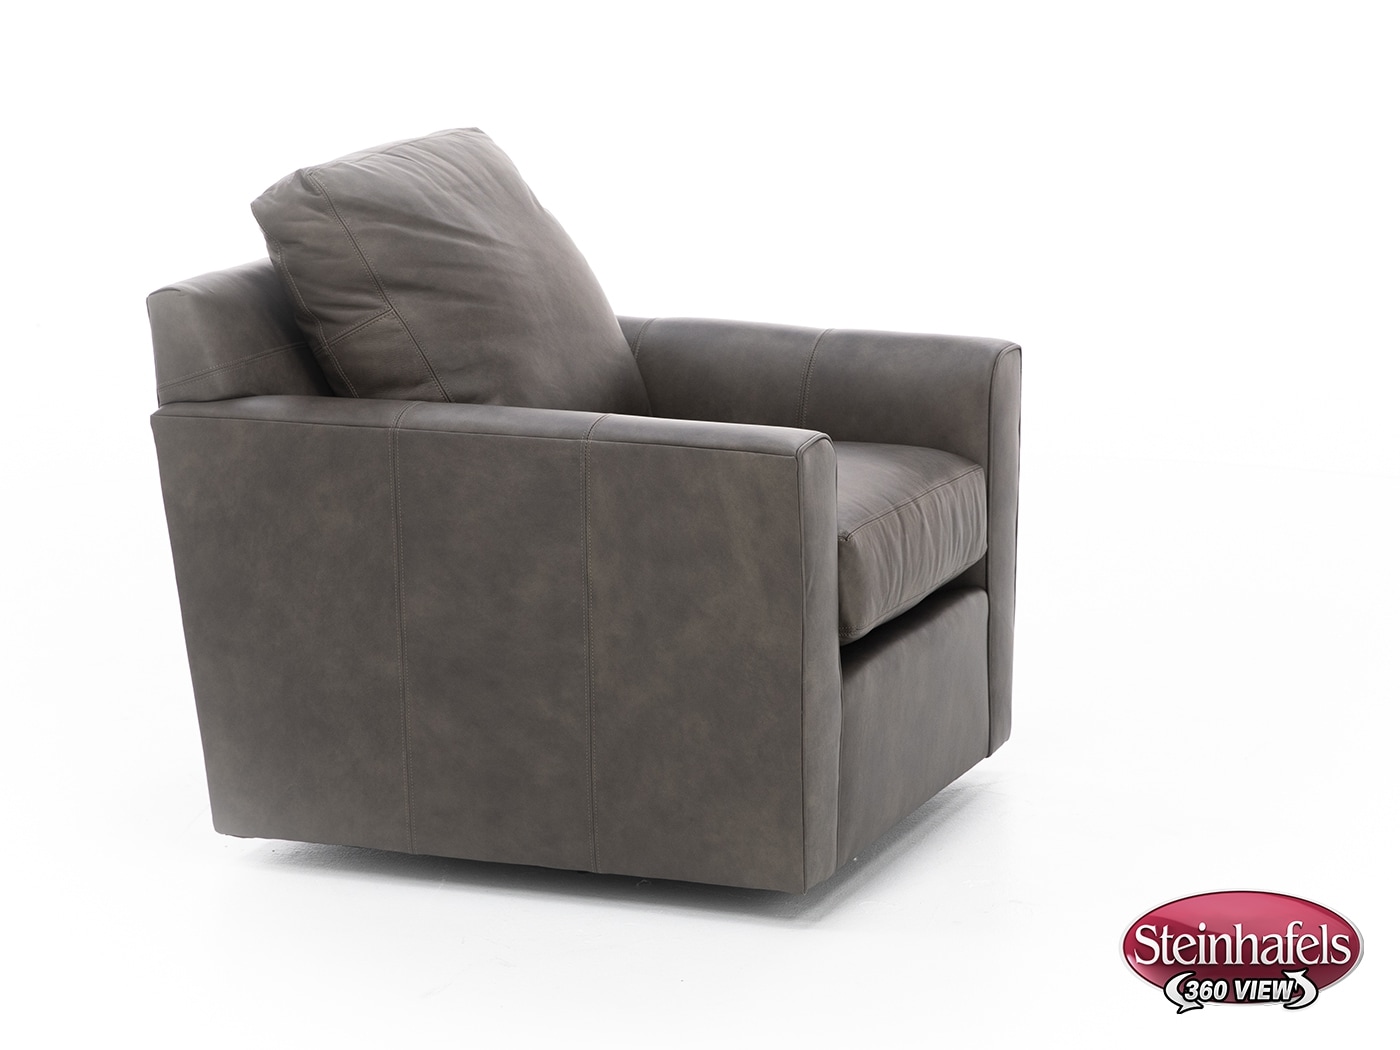 king hickory grey swivel chair  image z  